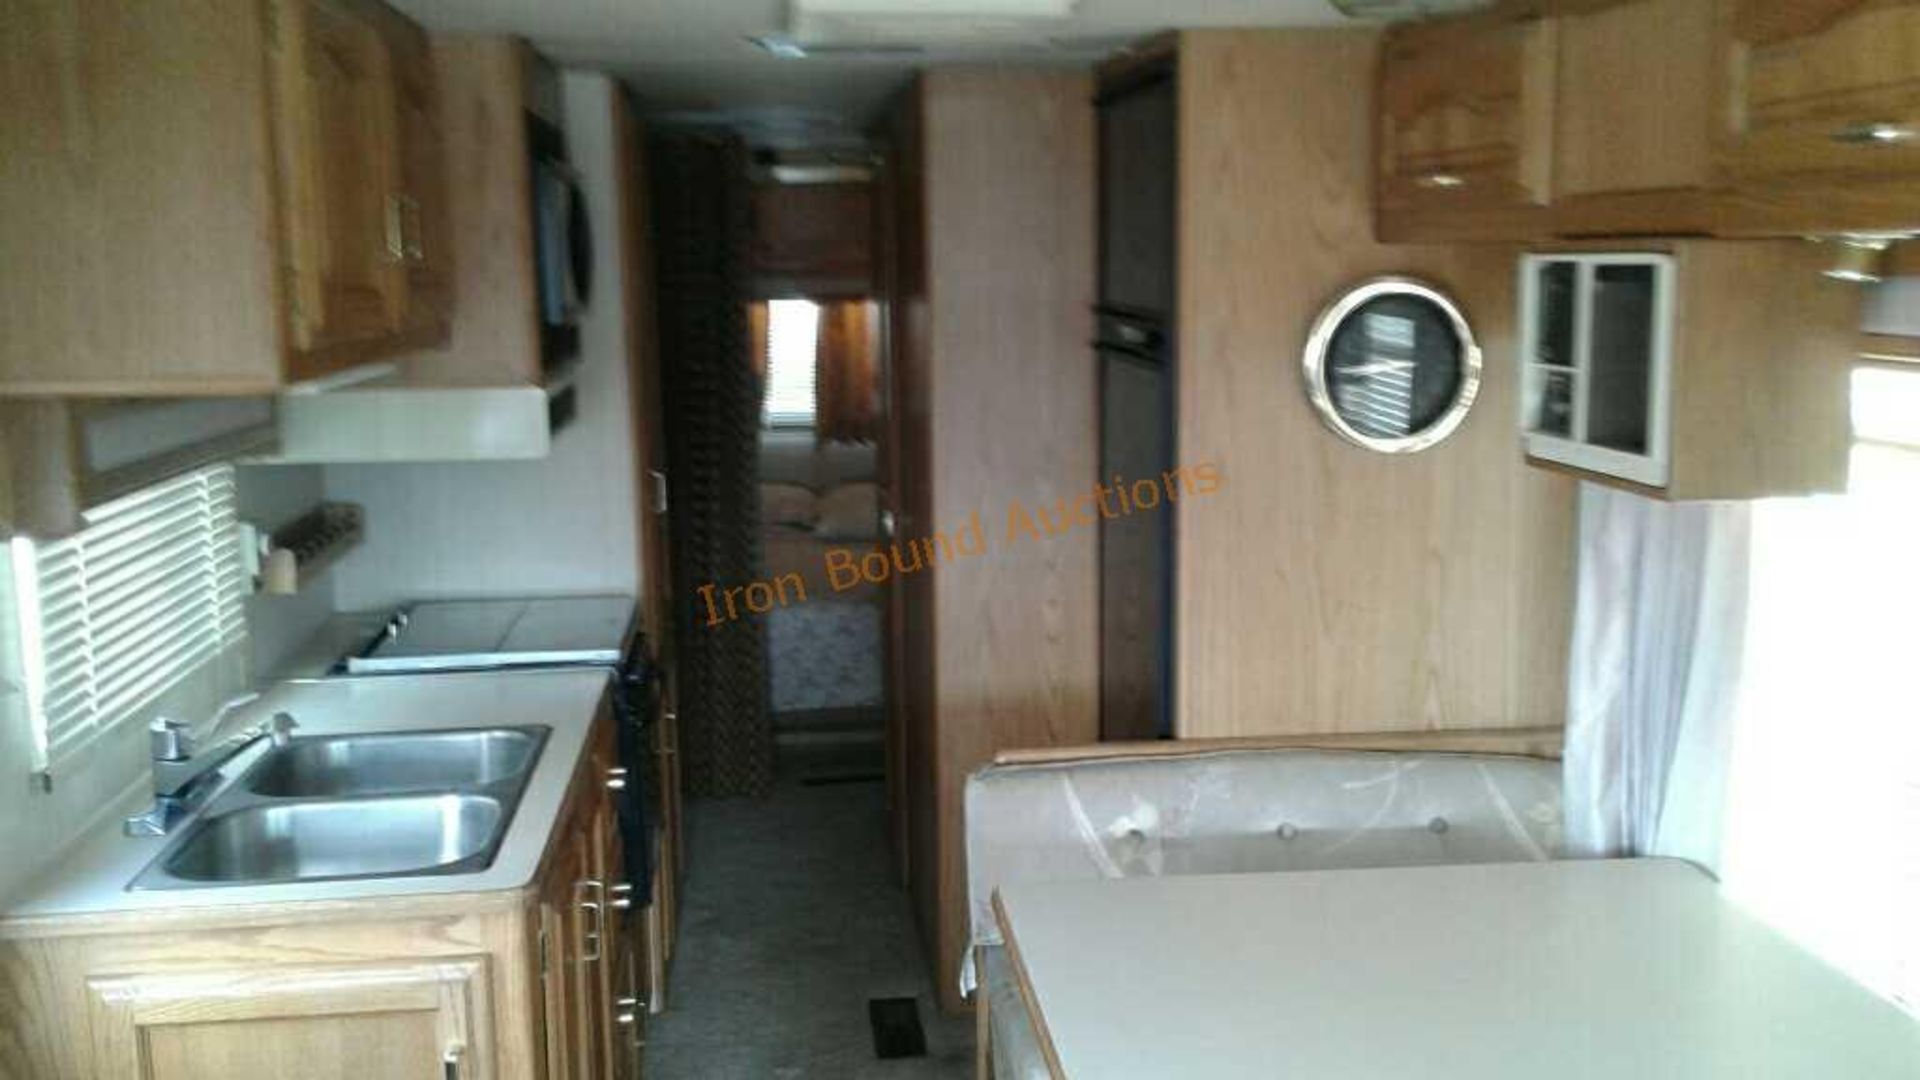 1989 Holiday Rambler Imperial Motorhome - Image 22 of 25